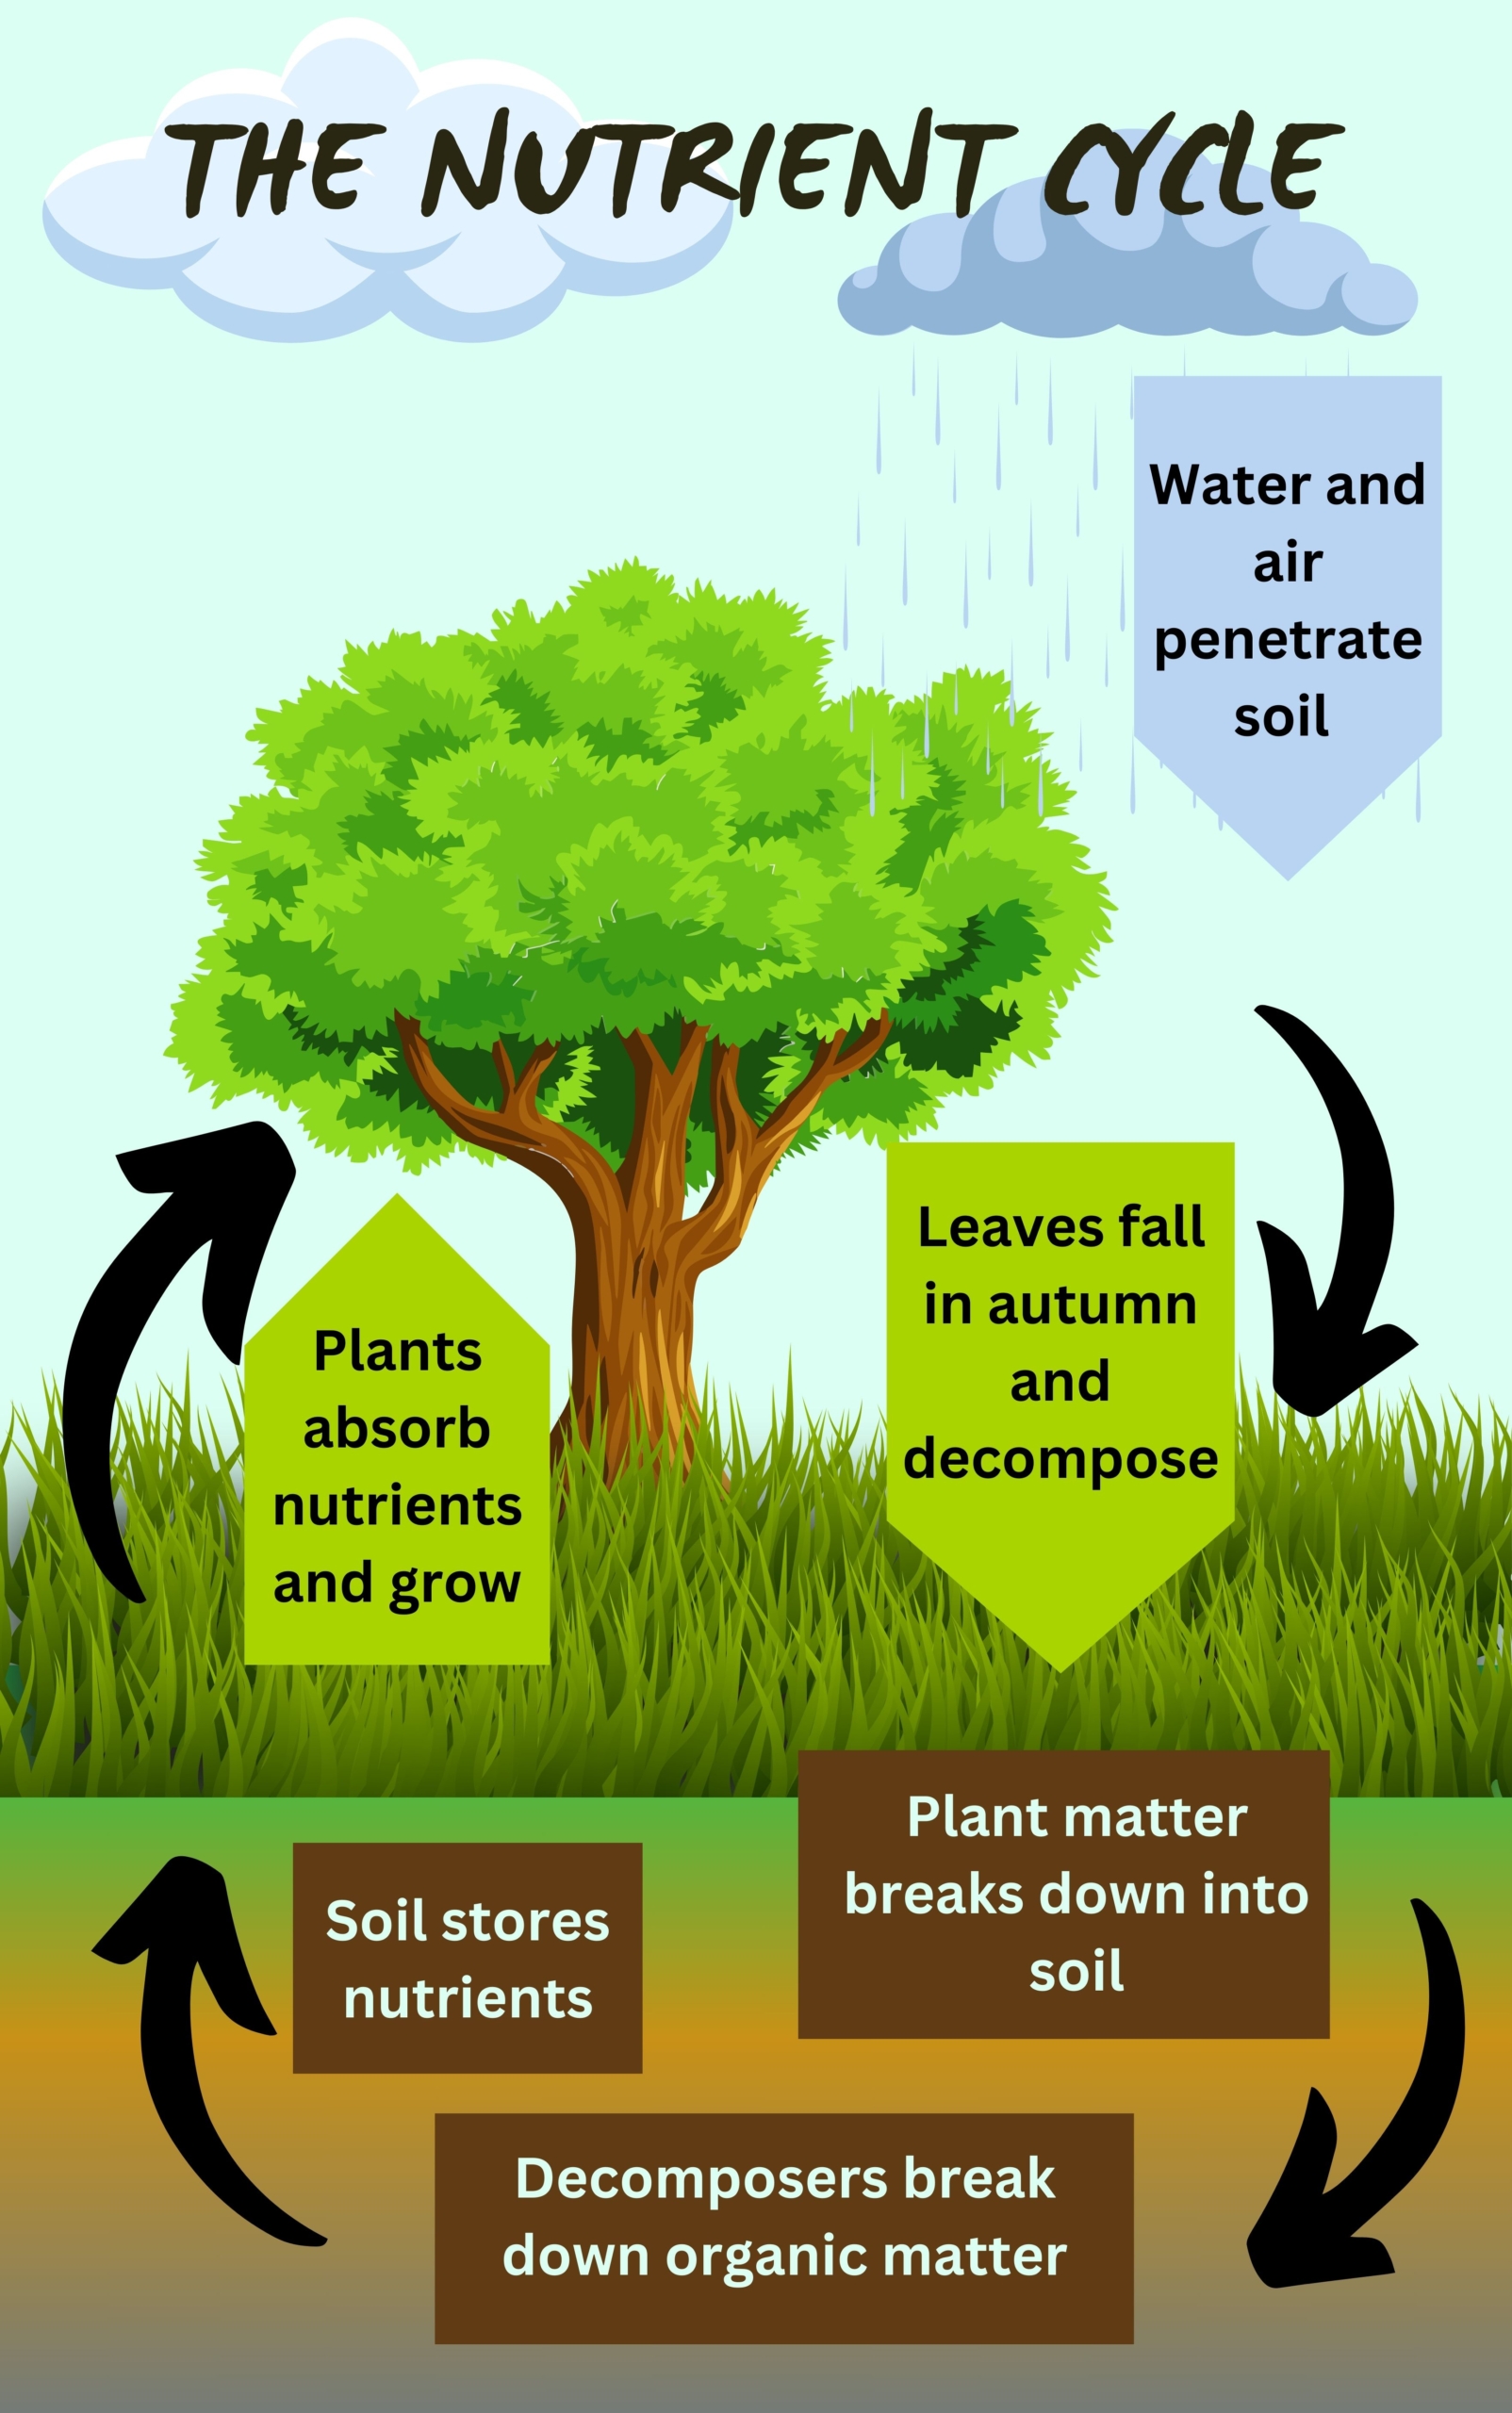 A diagram showing the nutrient cycle as leaves fall to the ground and decomposers break them down to be used by plants as they absorb nutrients from the soil.